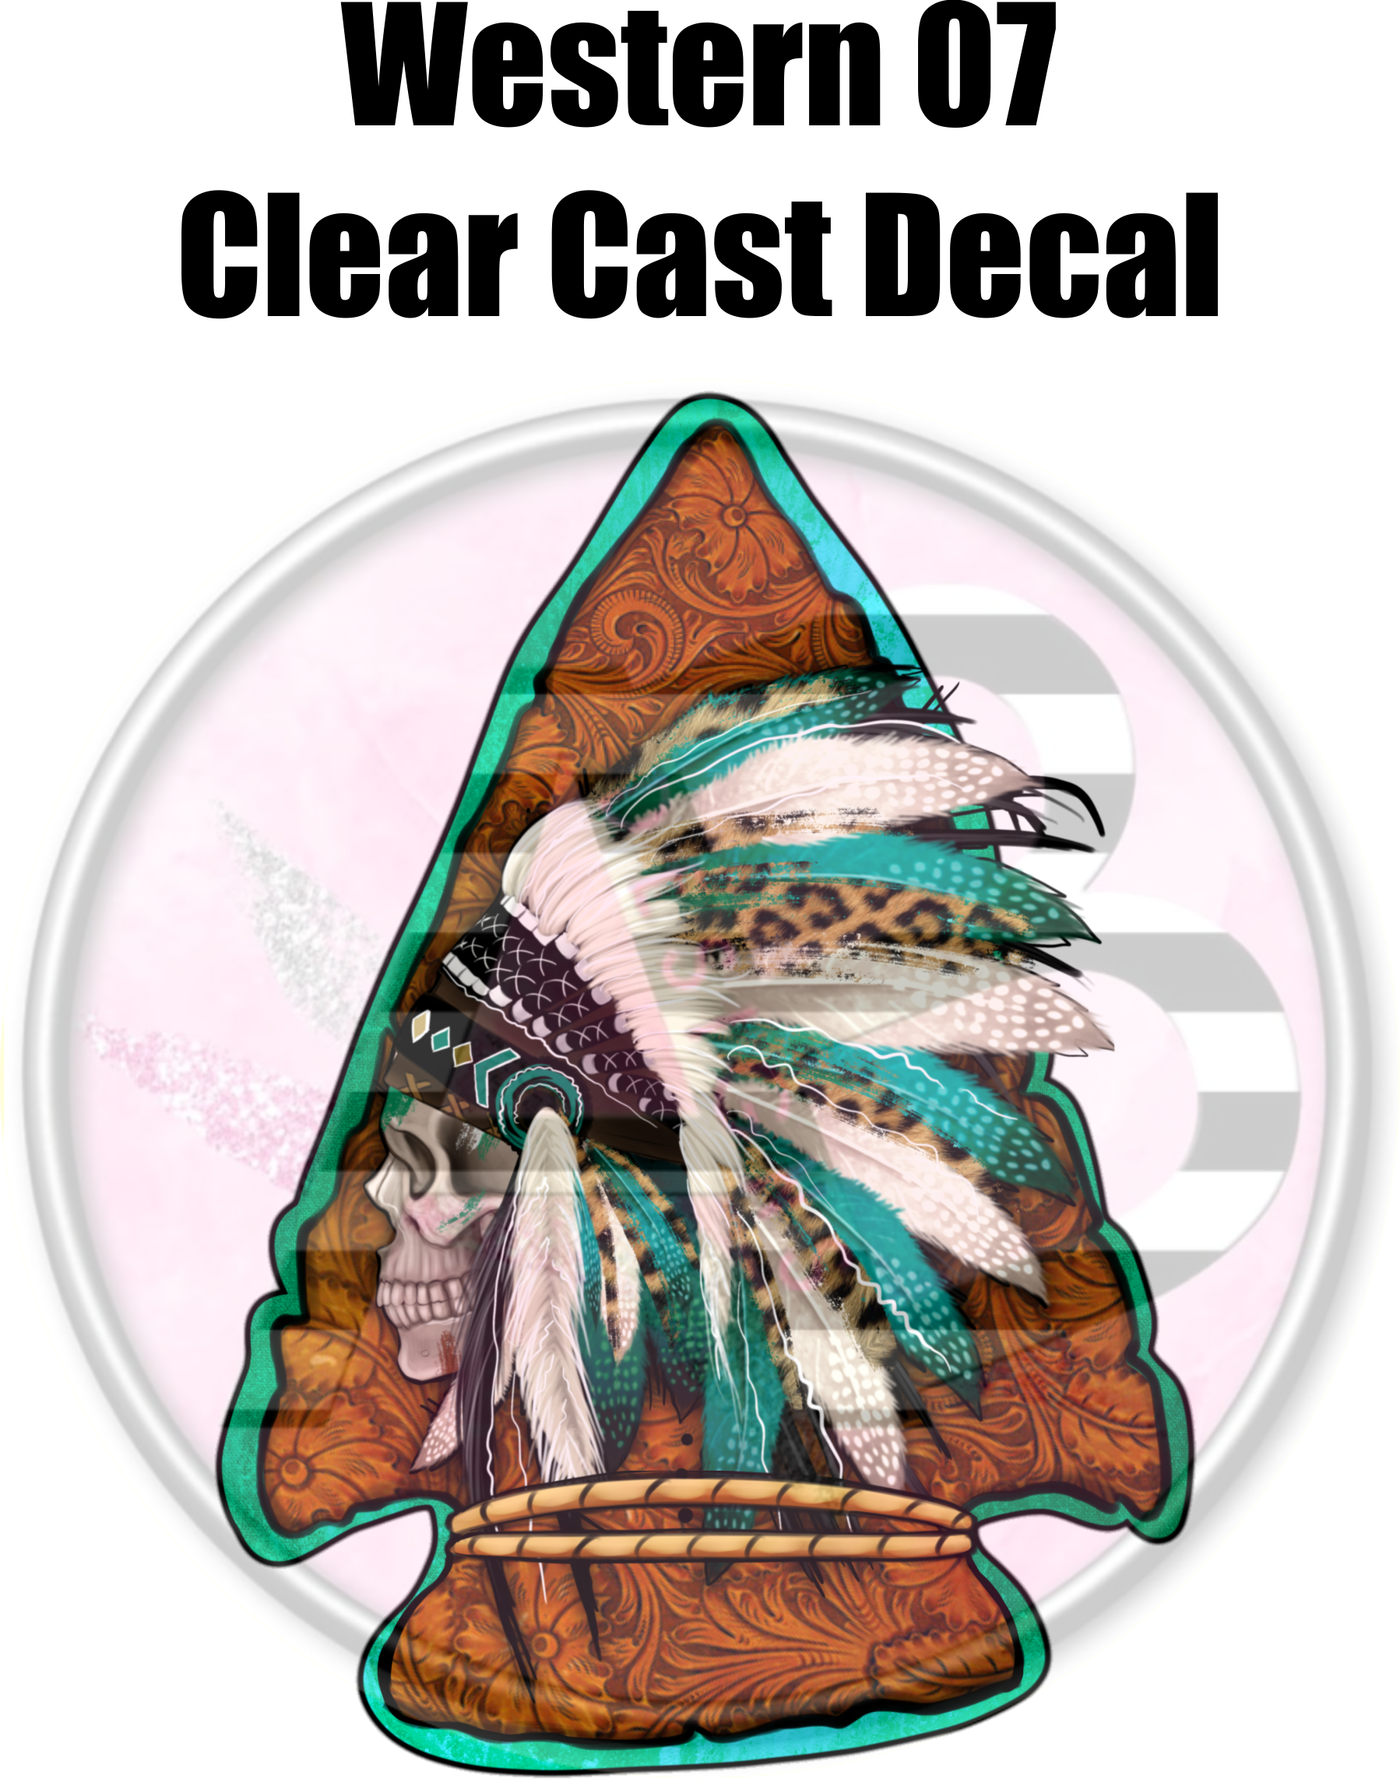 Western 07 - Clear Cast Decal